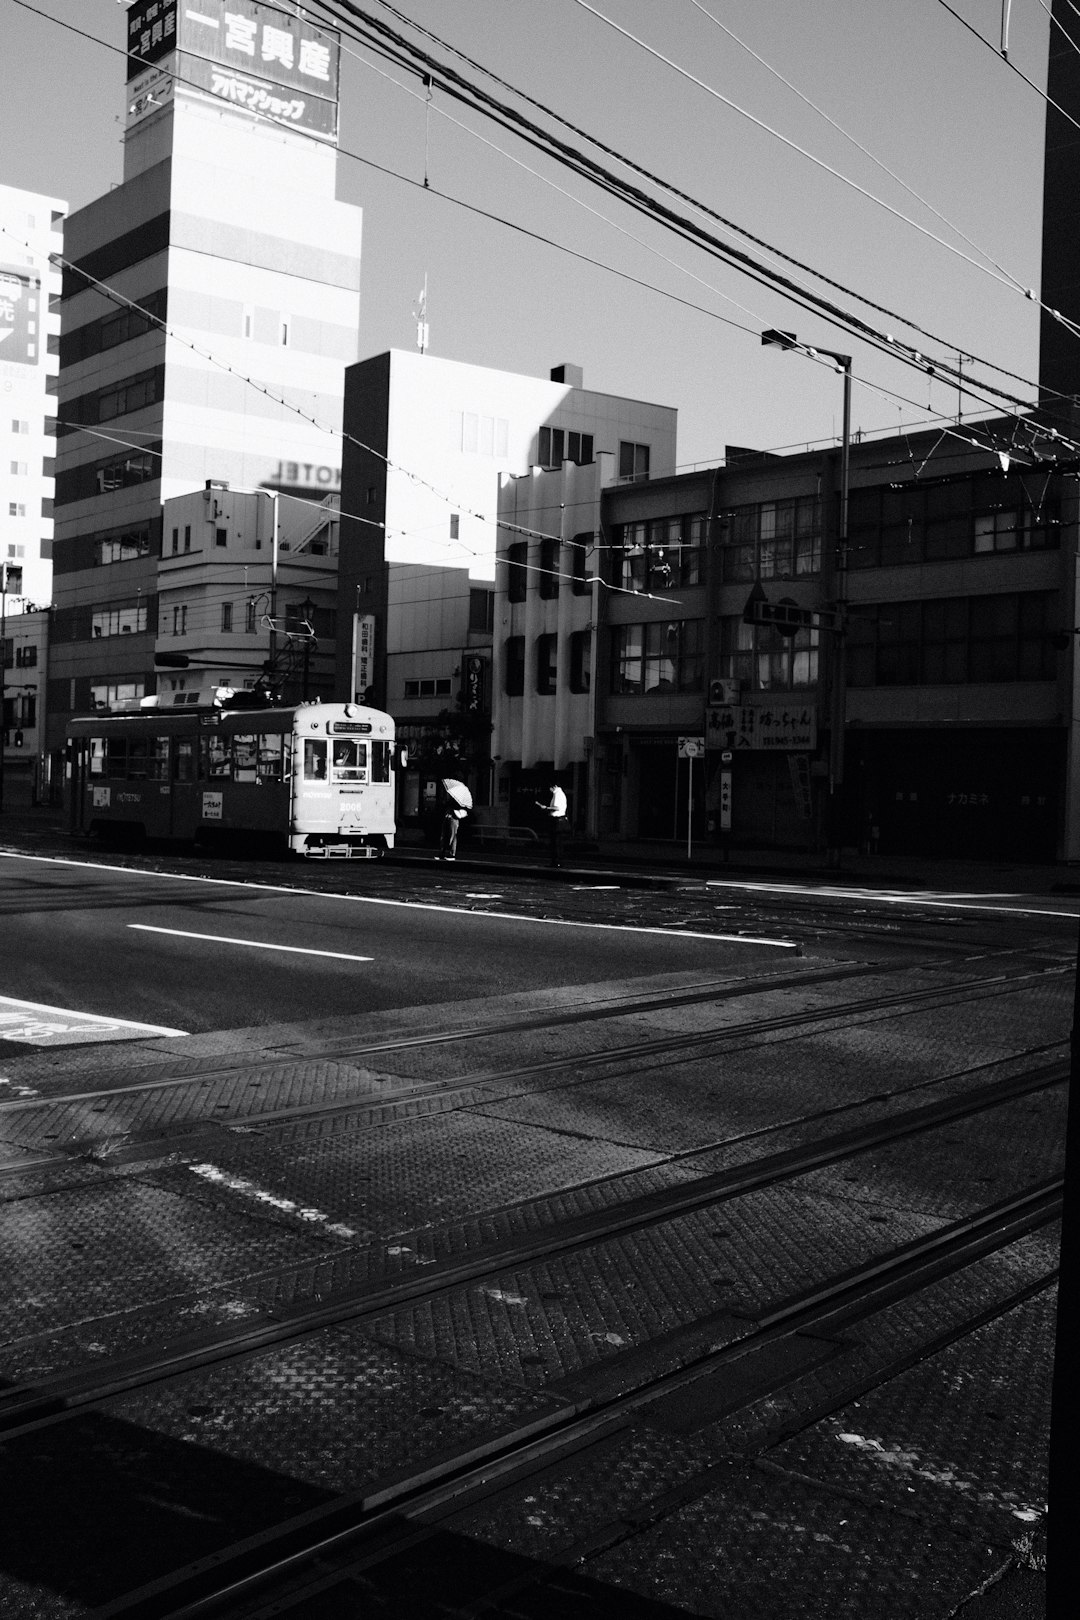 white and black tram on road near building during daytime